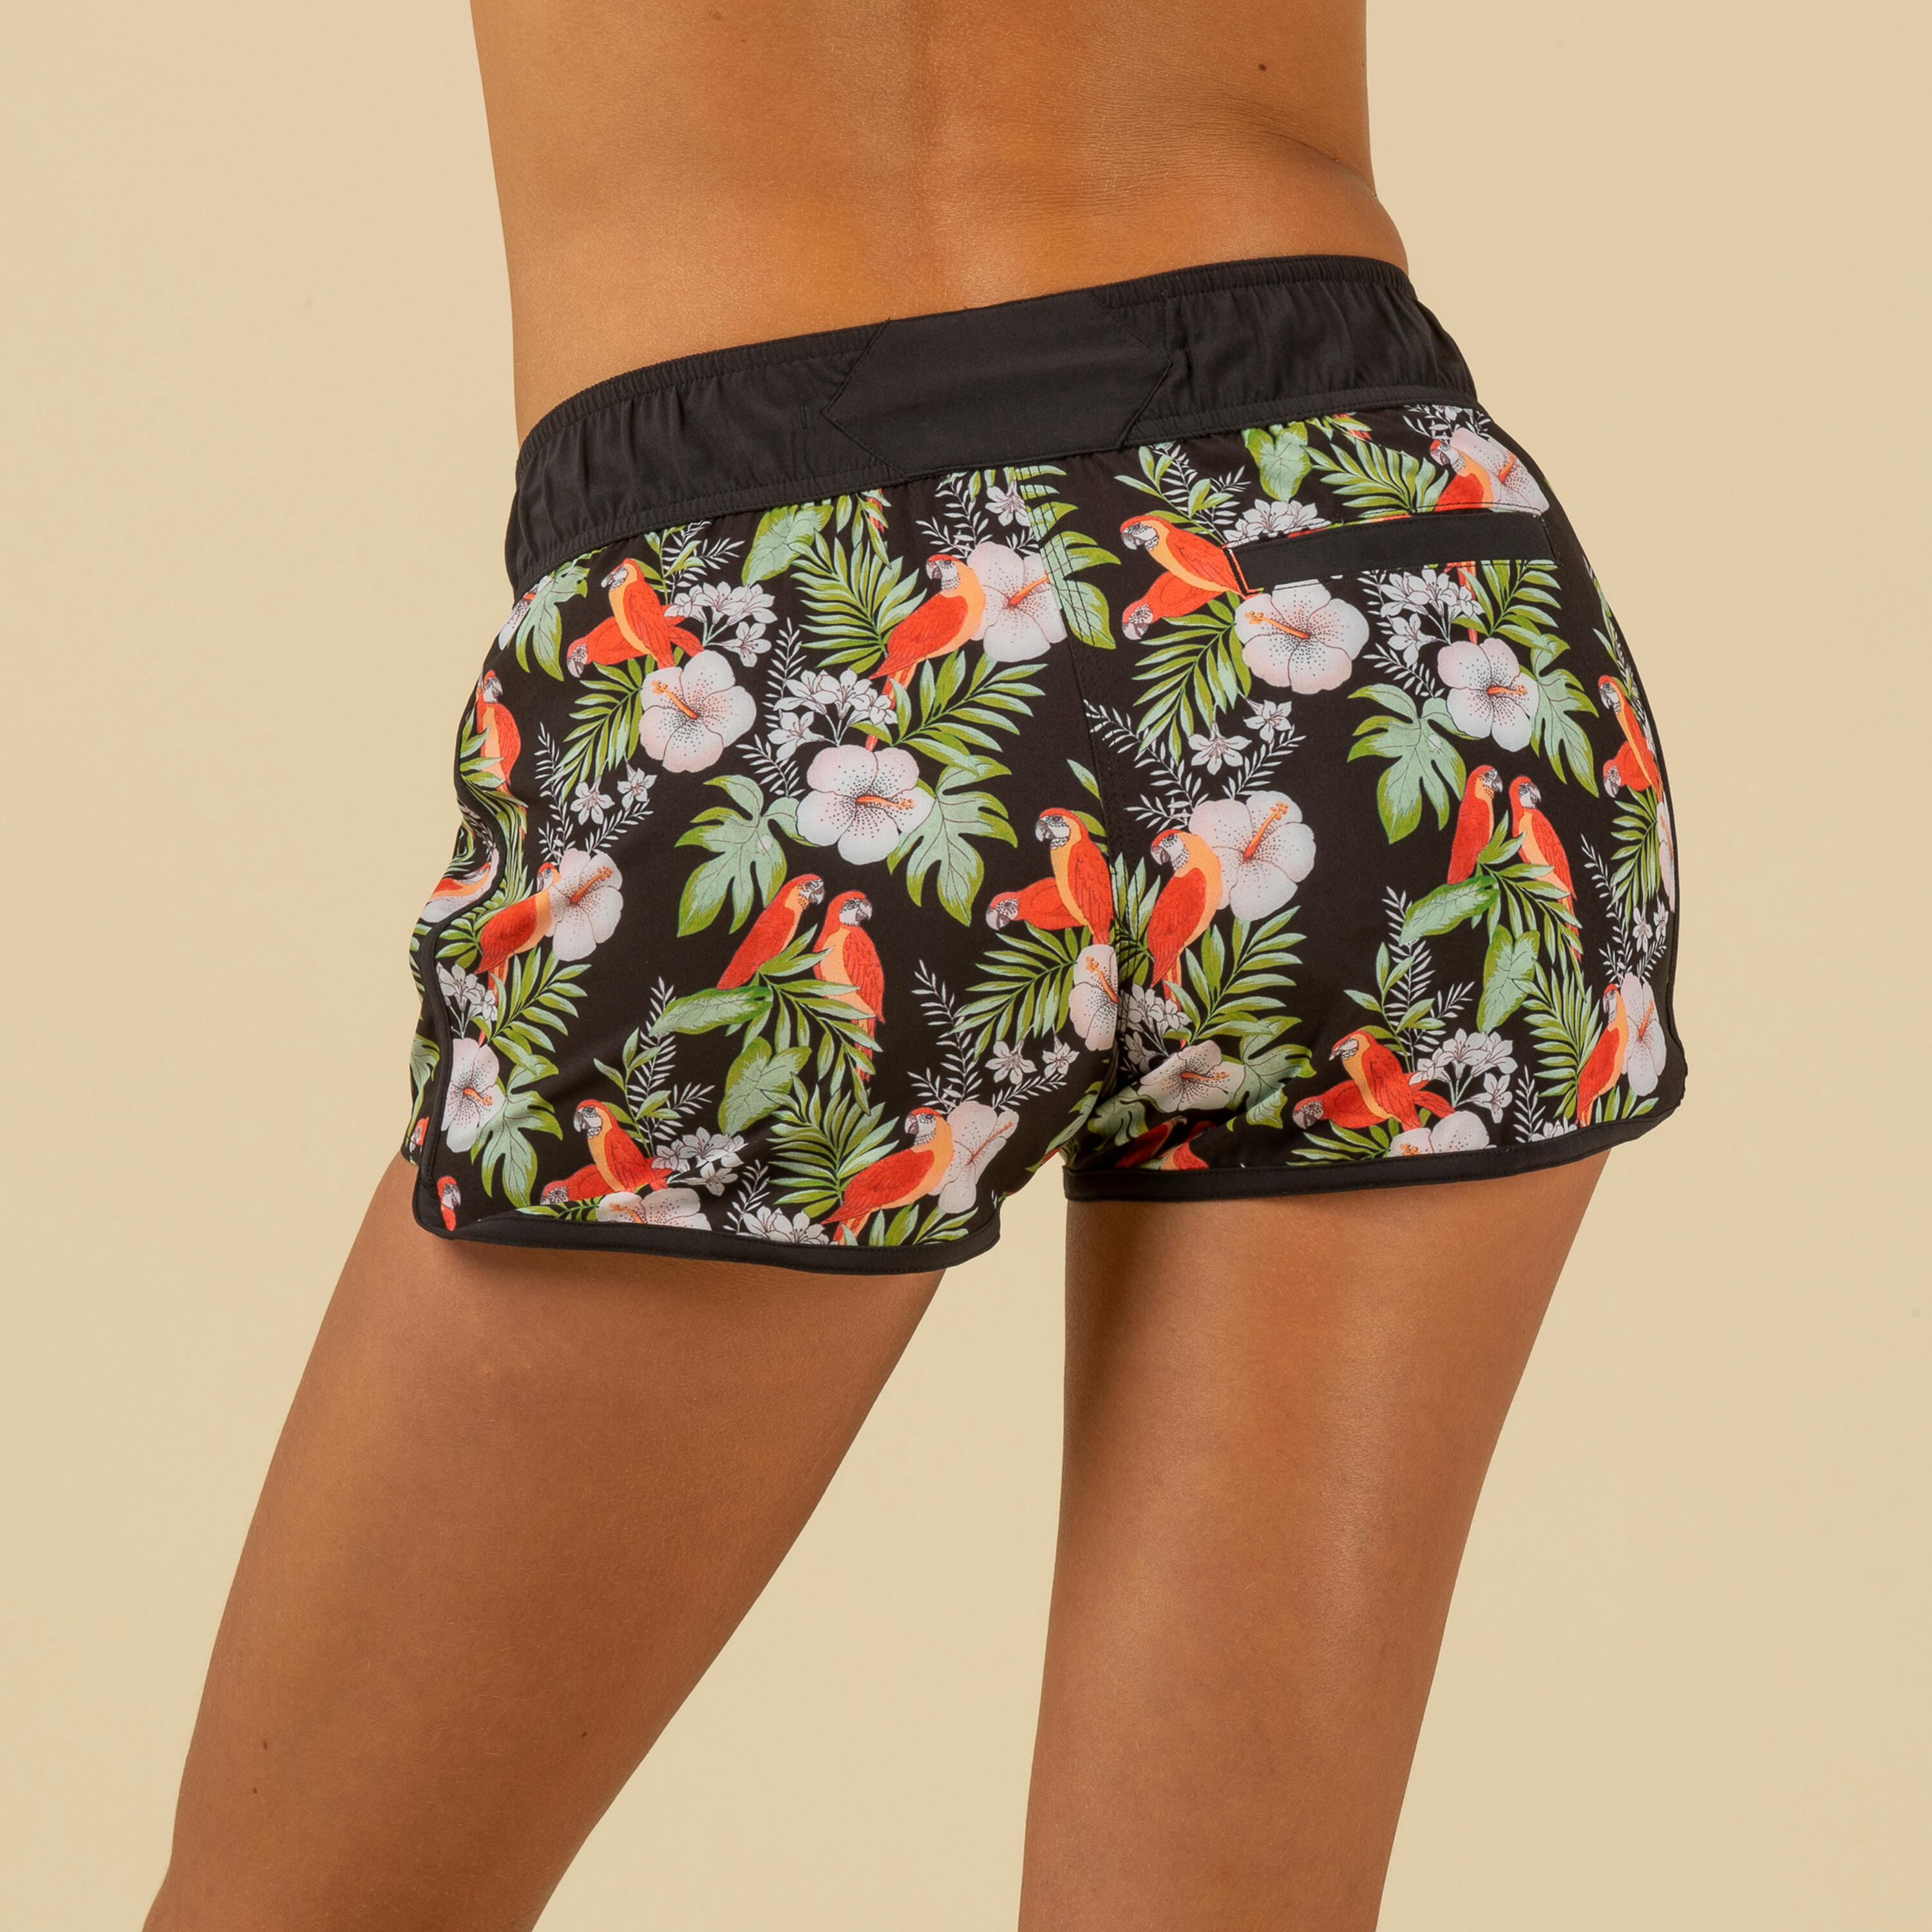 Women's boardshorts with elastic waistband and drawstring TINI PARROT 3/8